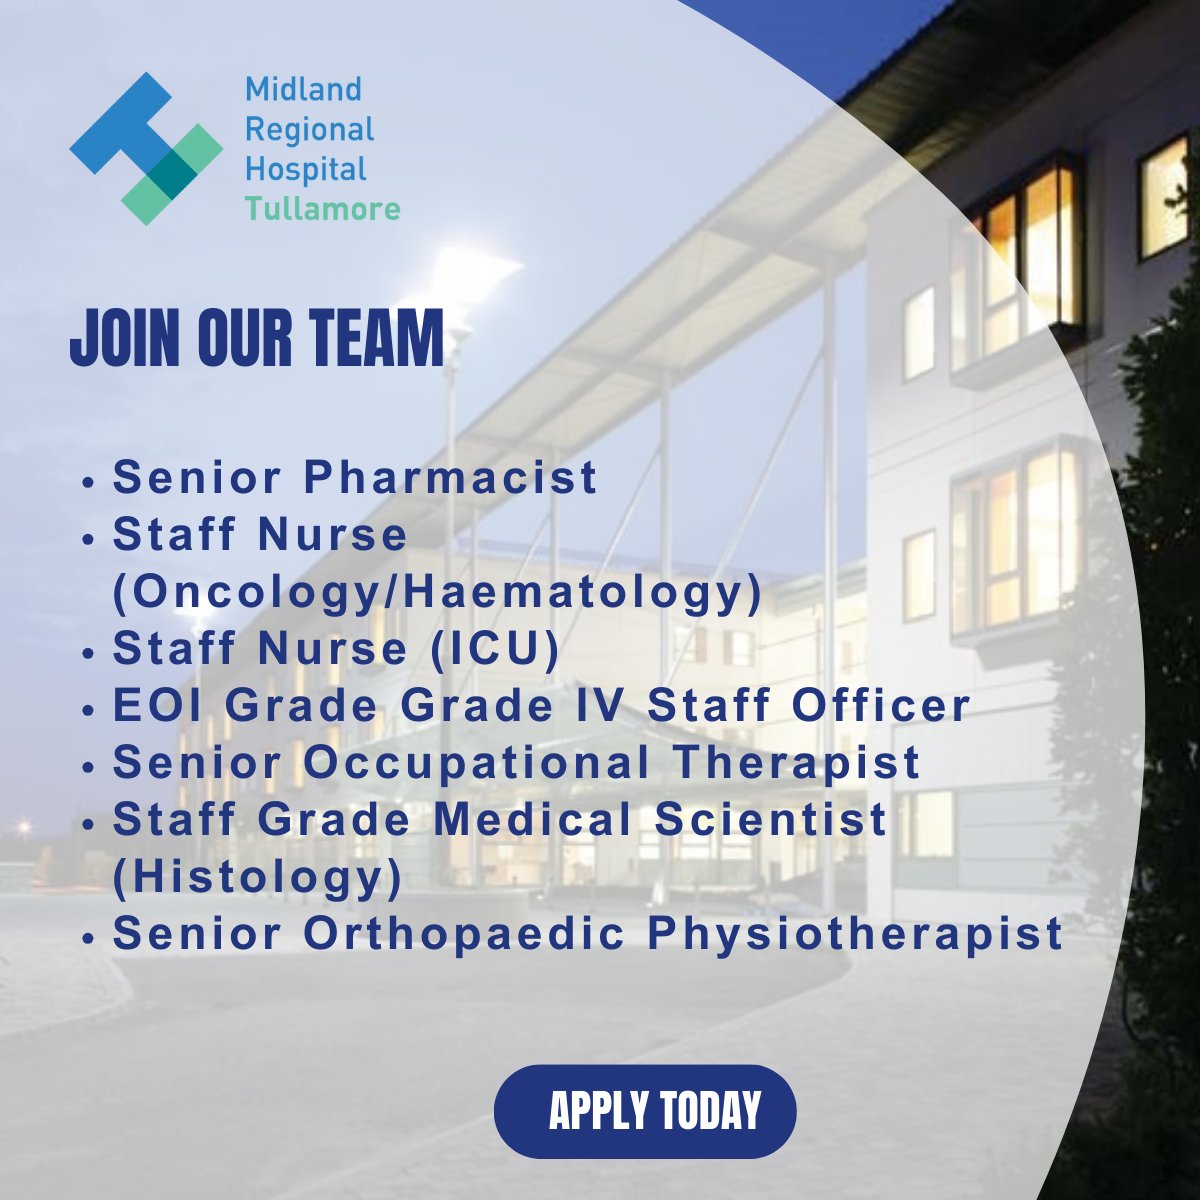 #MRHTullamore is currently hiring for a number of positions.  

Apply here today: bit.ly/4ayB36y

#jobopportunity #hiring #jobs #vacancies #jobfairy #DMHGJobs #team #opportunities